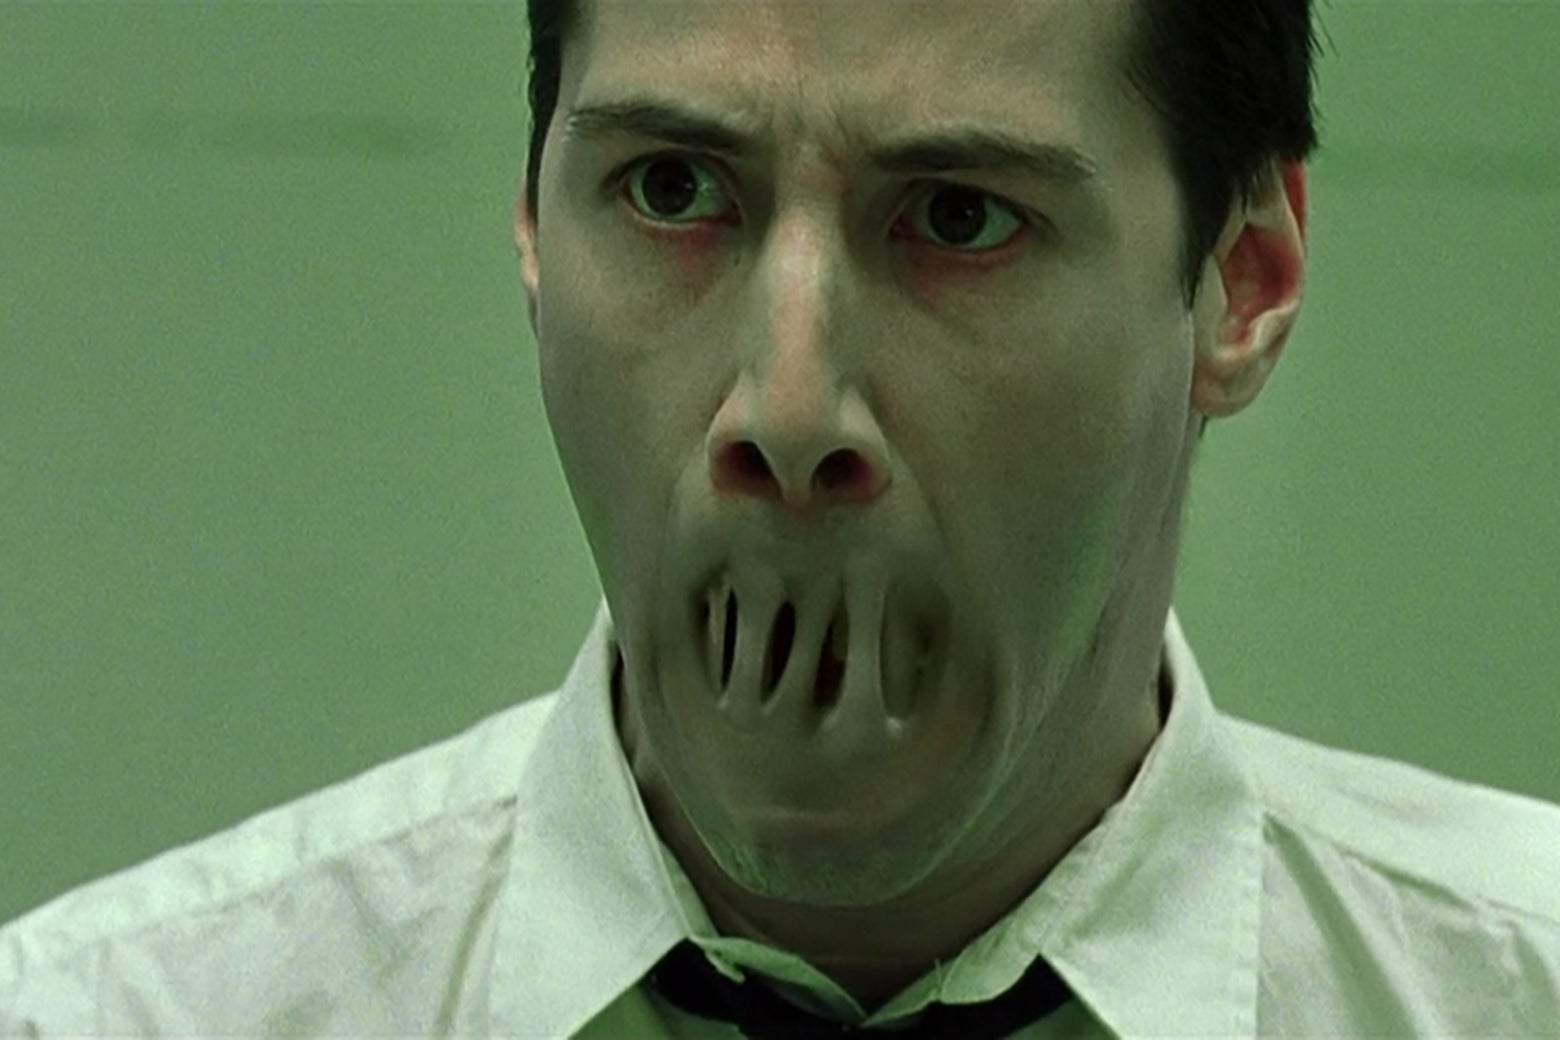 Keanu Reeves, in a still from the Matrix, staring in horror as his lips seal together.